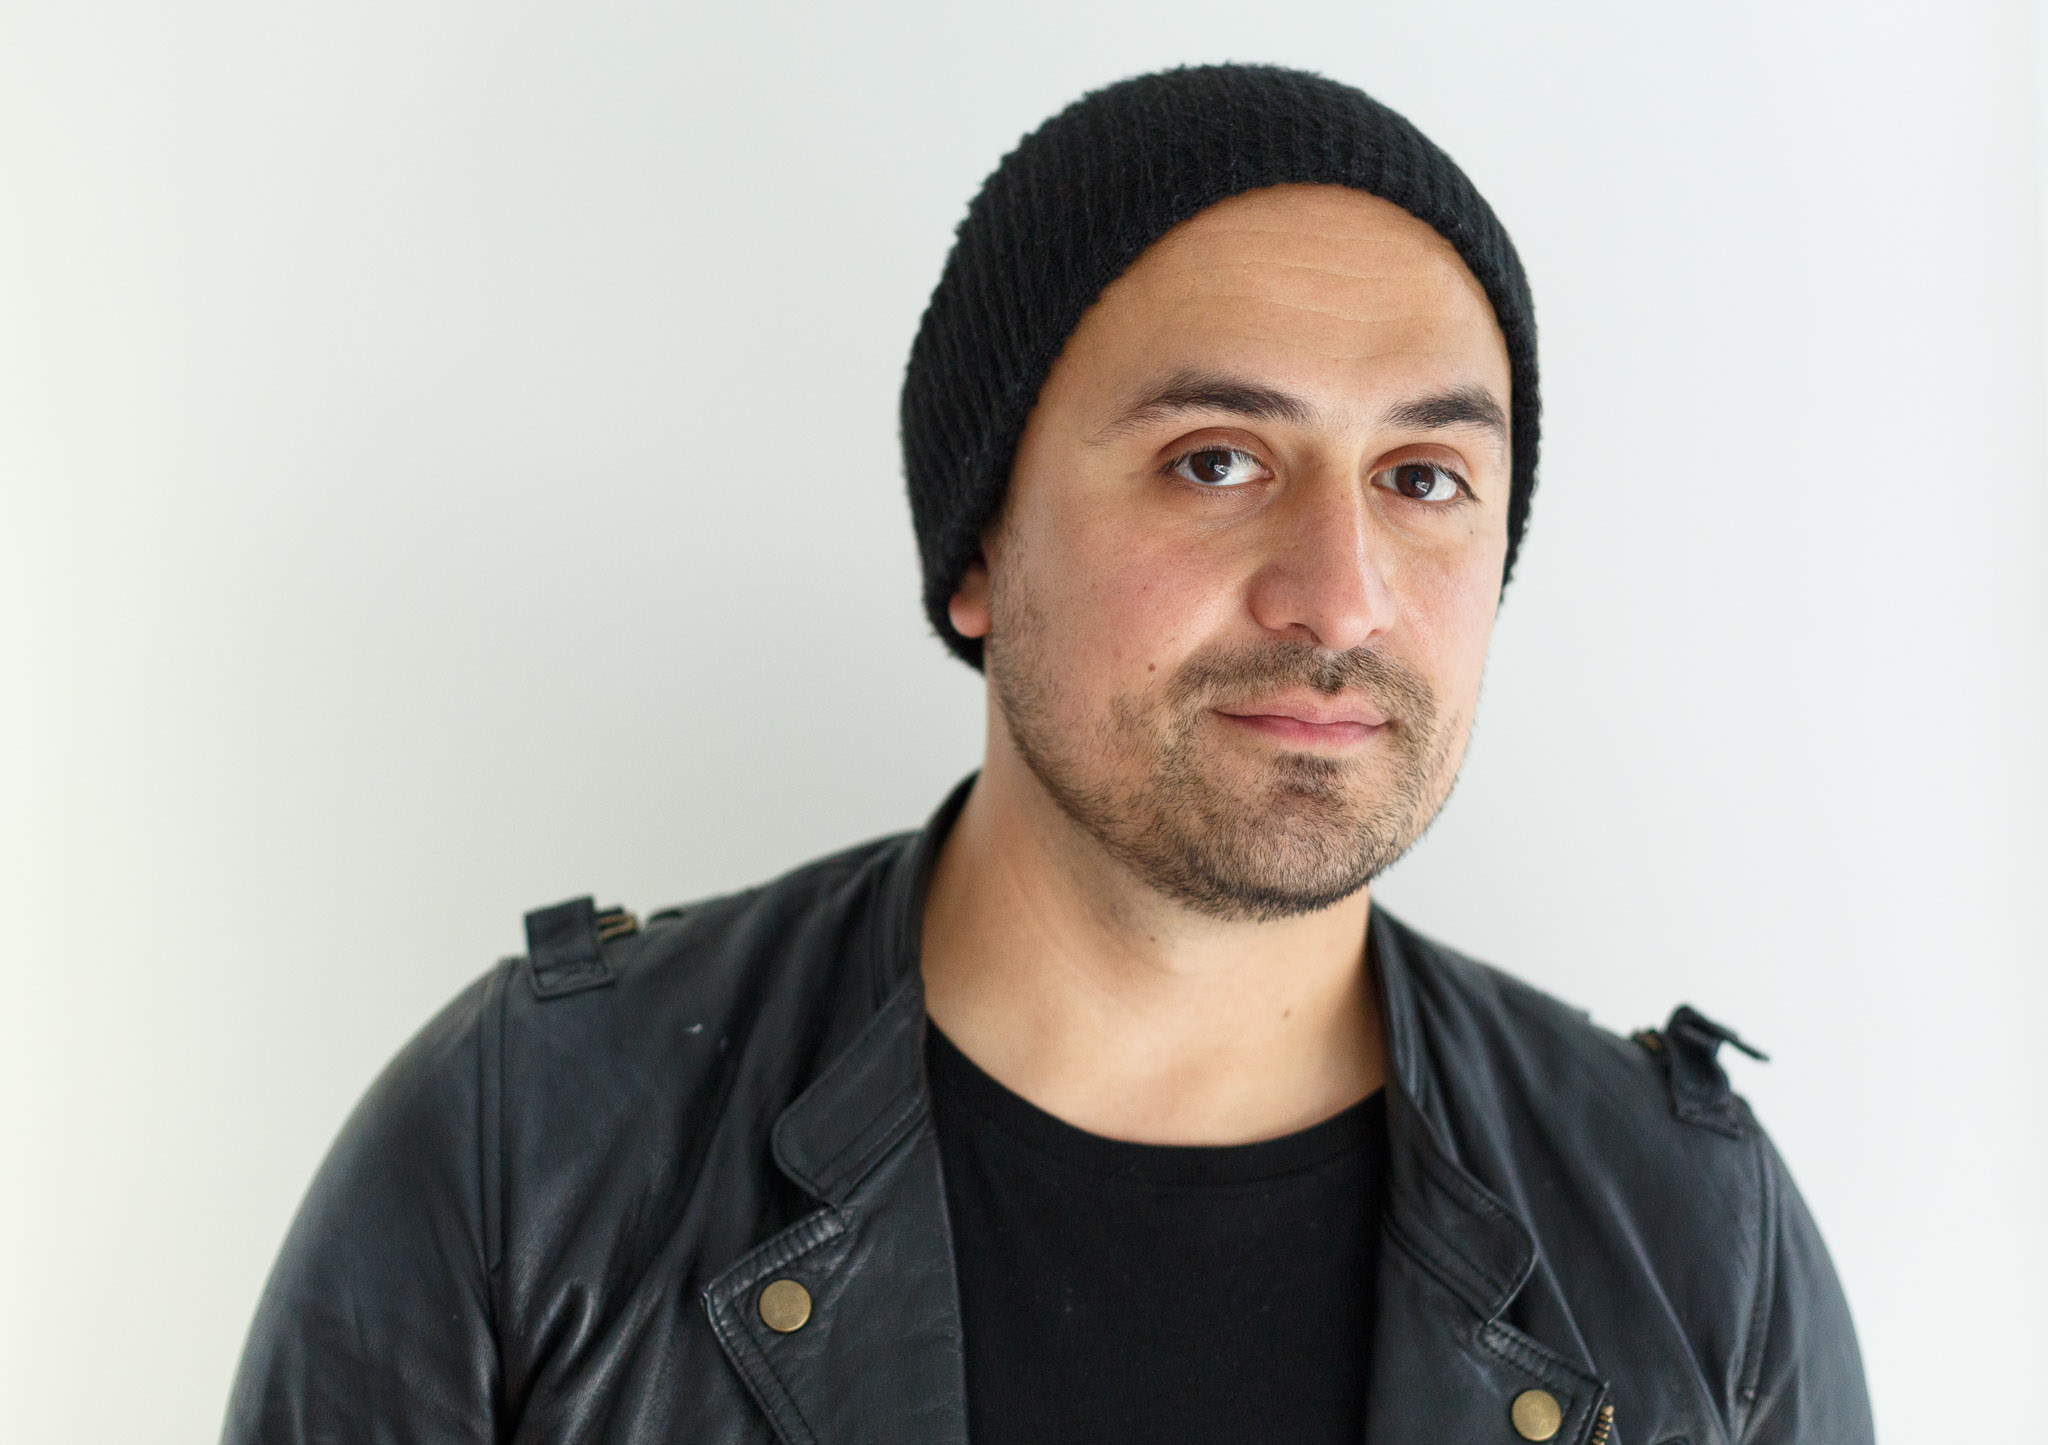 Oved Valadez, co-founder and creative director of Industry